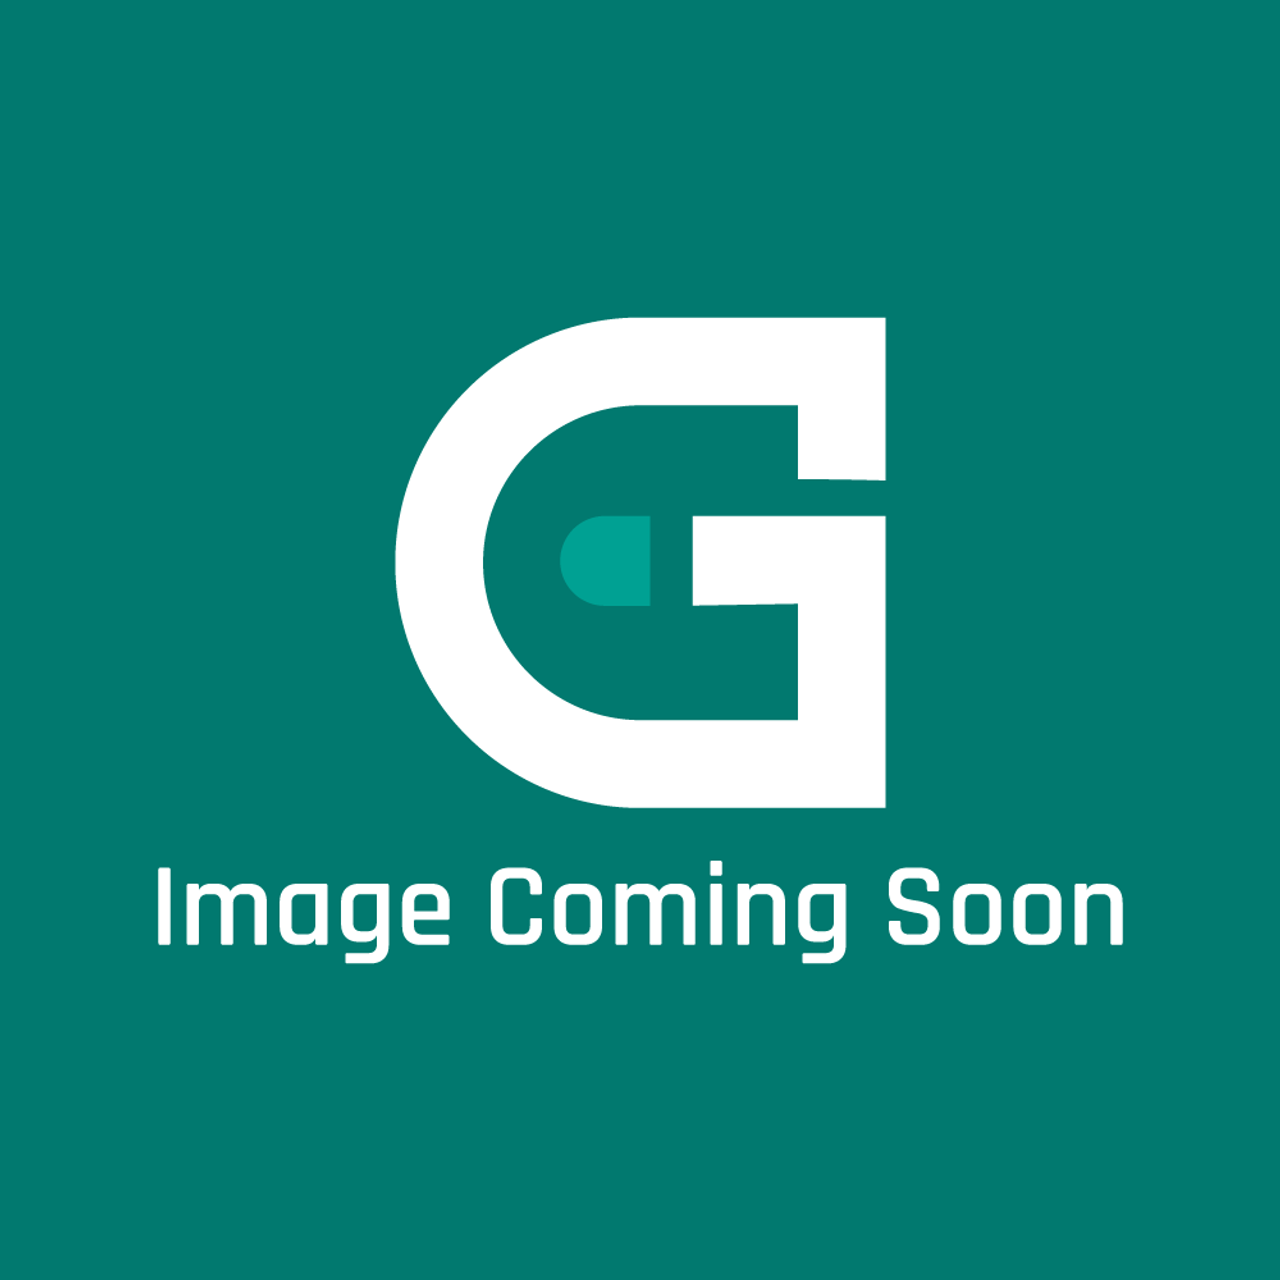 GE Appliances WR13X38772 - Reversible Cover - Black - Image Coming Soon!